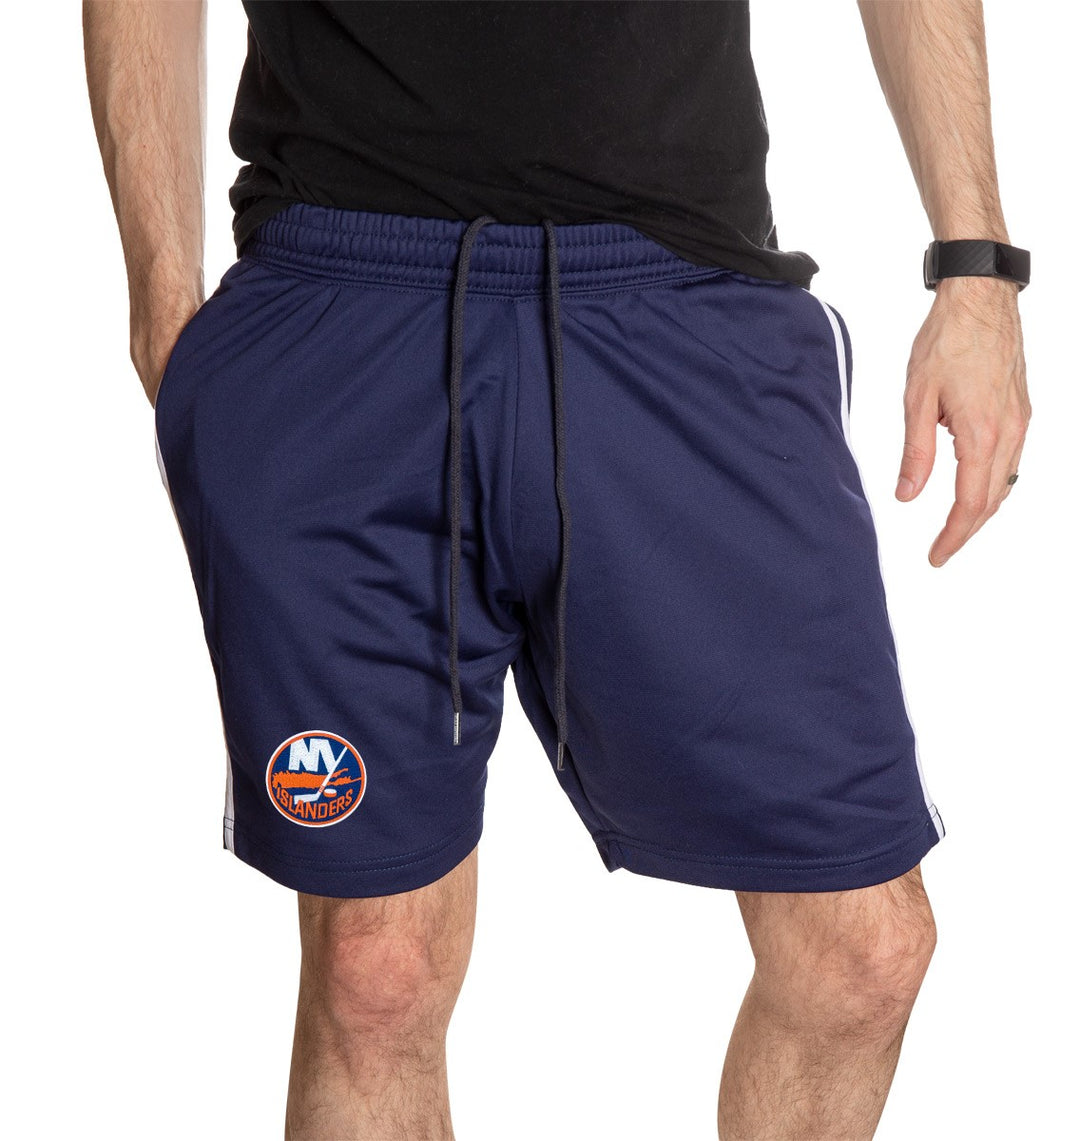 NHL Mens Official Team Two-Stripe Shorts- New York Islanders Full Front View Of Man Wearing Short With Hand IN One Pocket